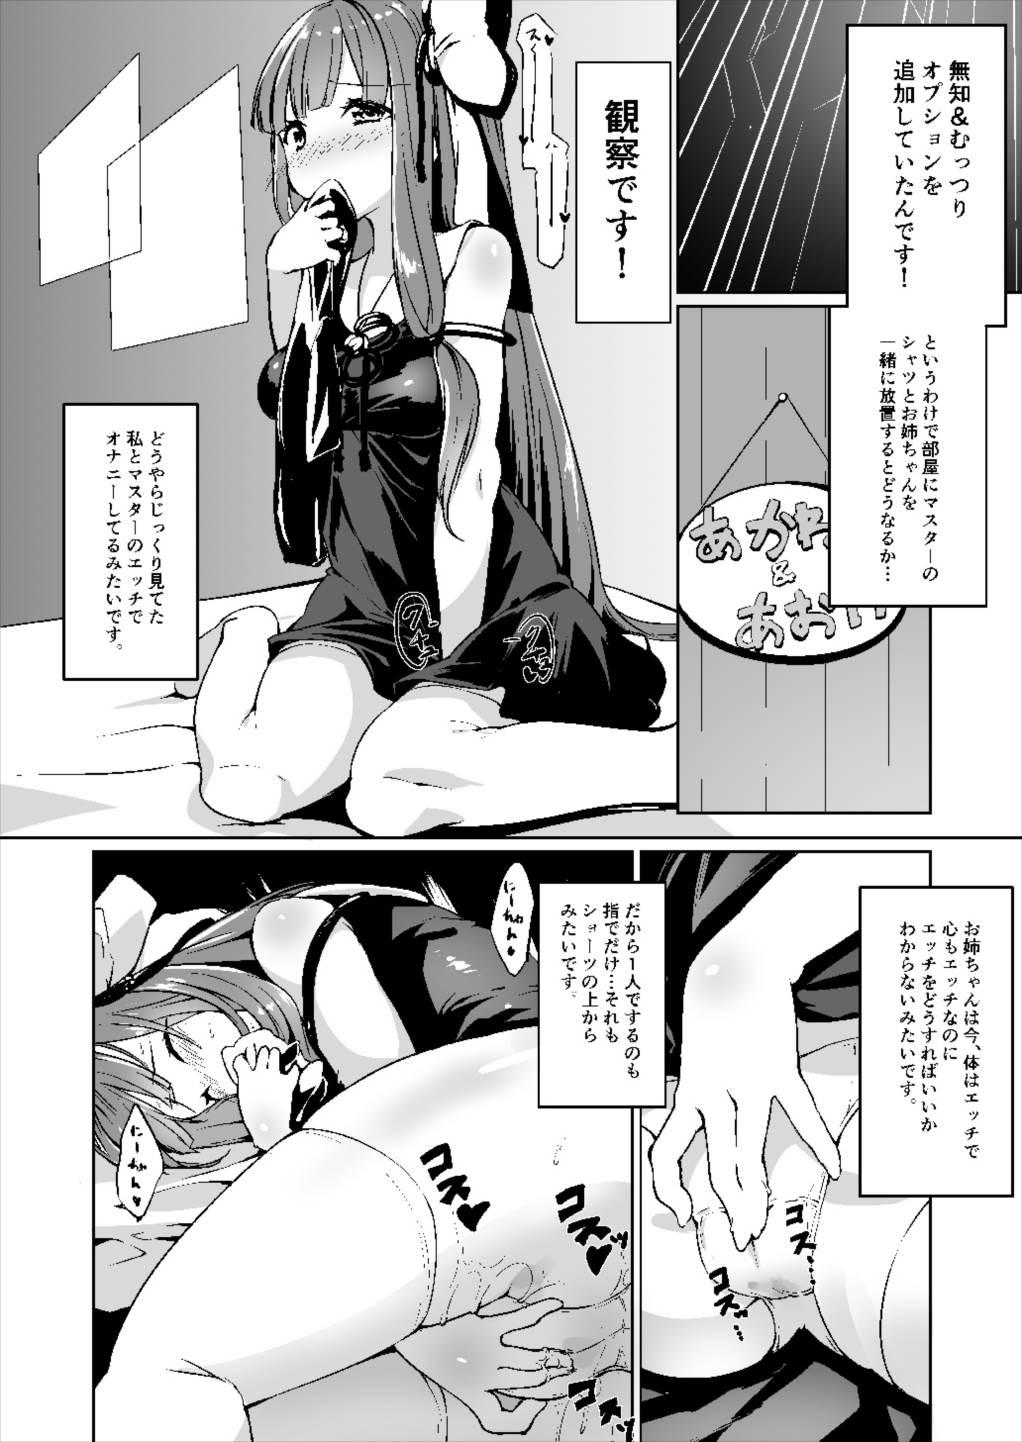 Consolo コトノハラバーズ VOL.06 【お姉ちゃん観察日記】 - Vocaloid Voiceroid 3some - Page 8